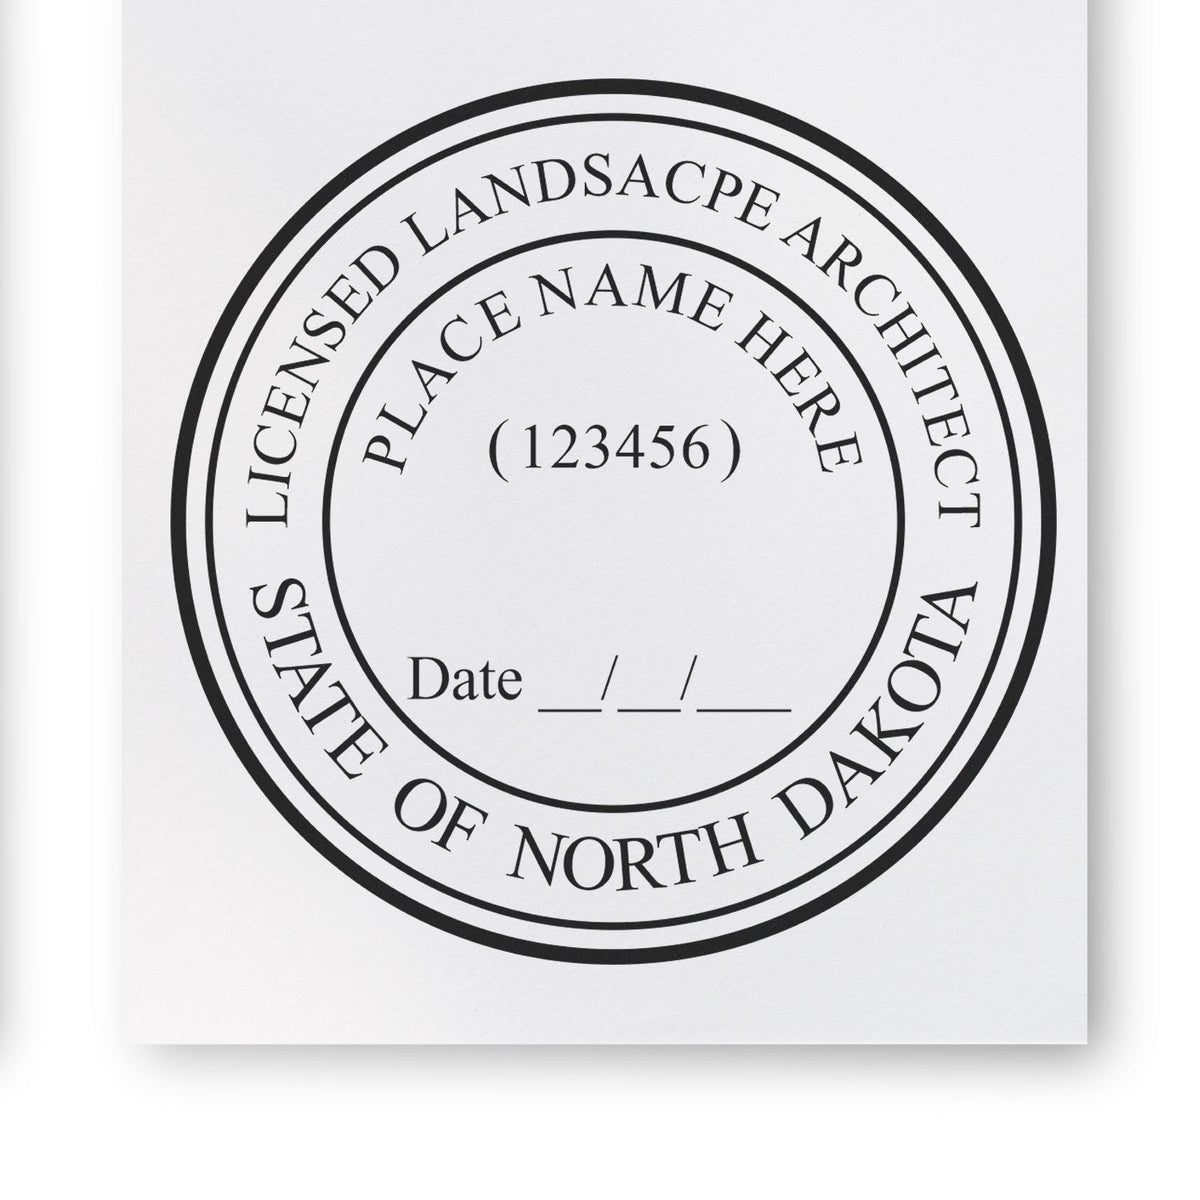 A lifestyle photo showing a stamped image of the Digital North Dakota Landscape Architect Stamp on a piece of paper